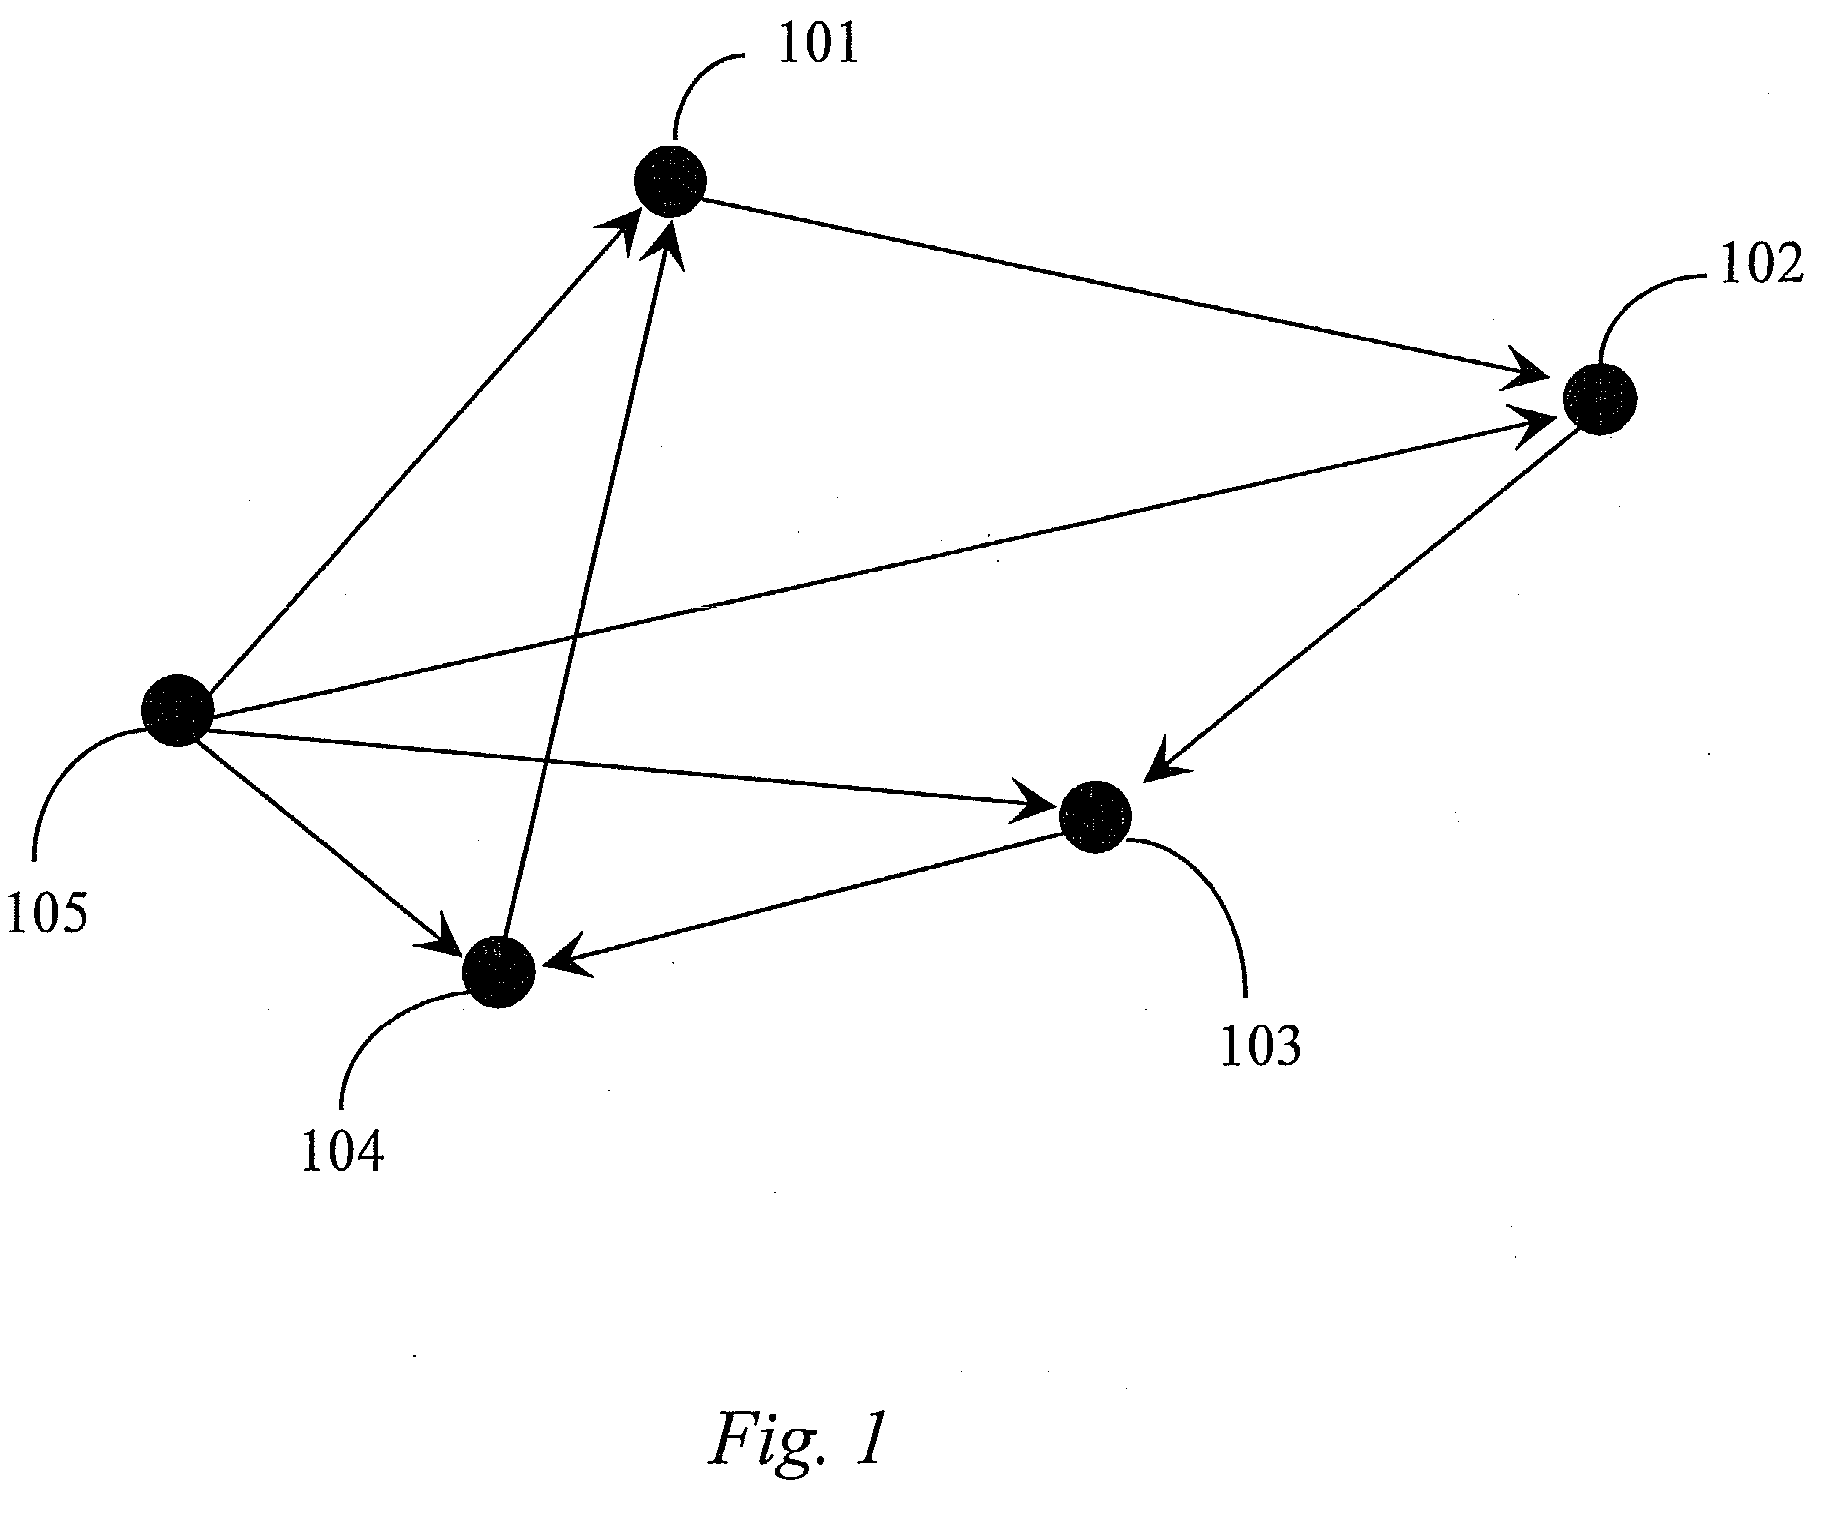 Page Ranking Based on a Behavioral WEB Graph